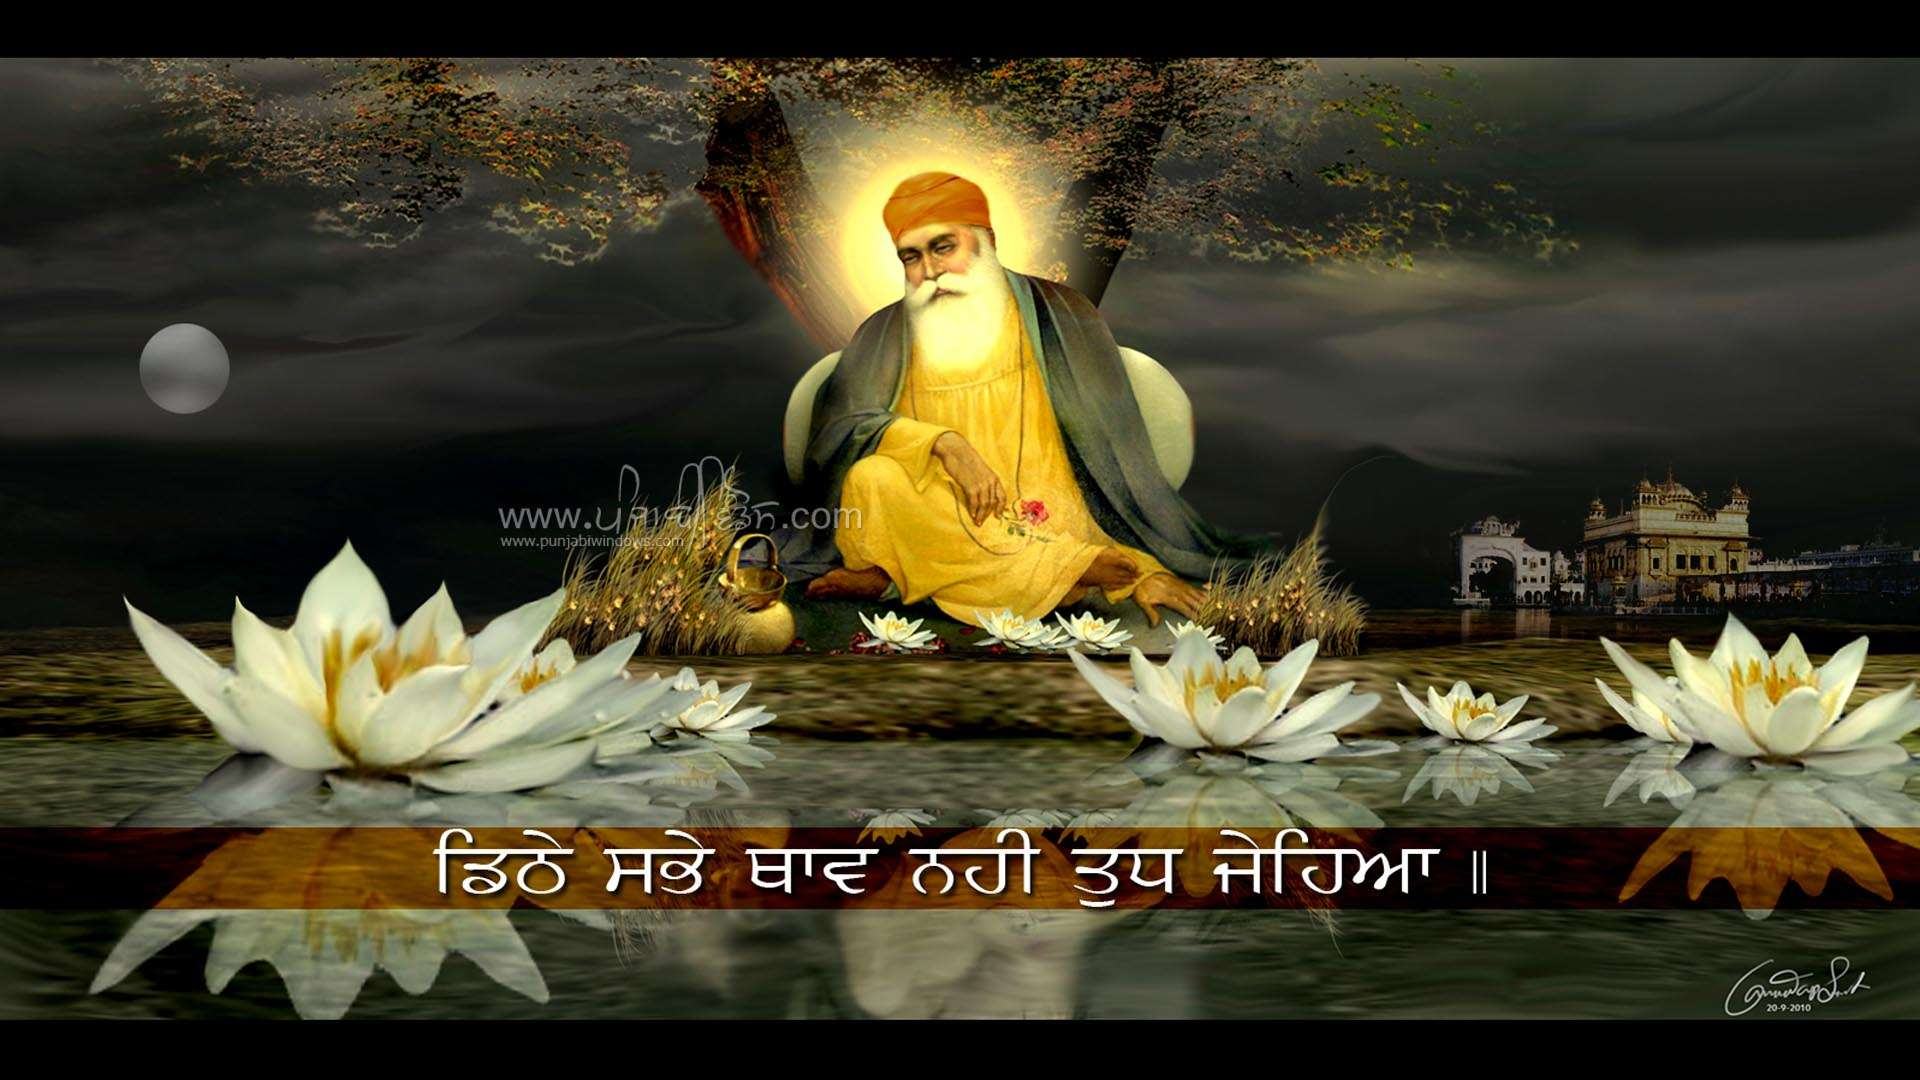 Free download Download Wallpapers Backgrounds Sikh Gurus ...